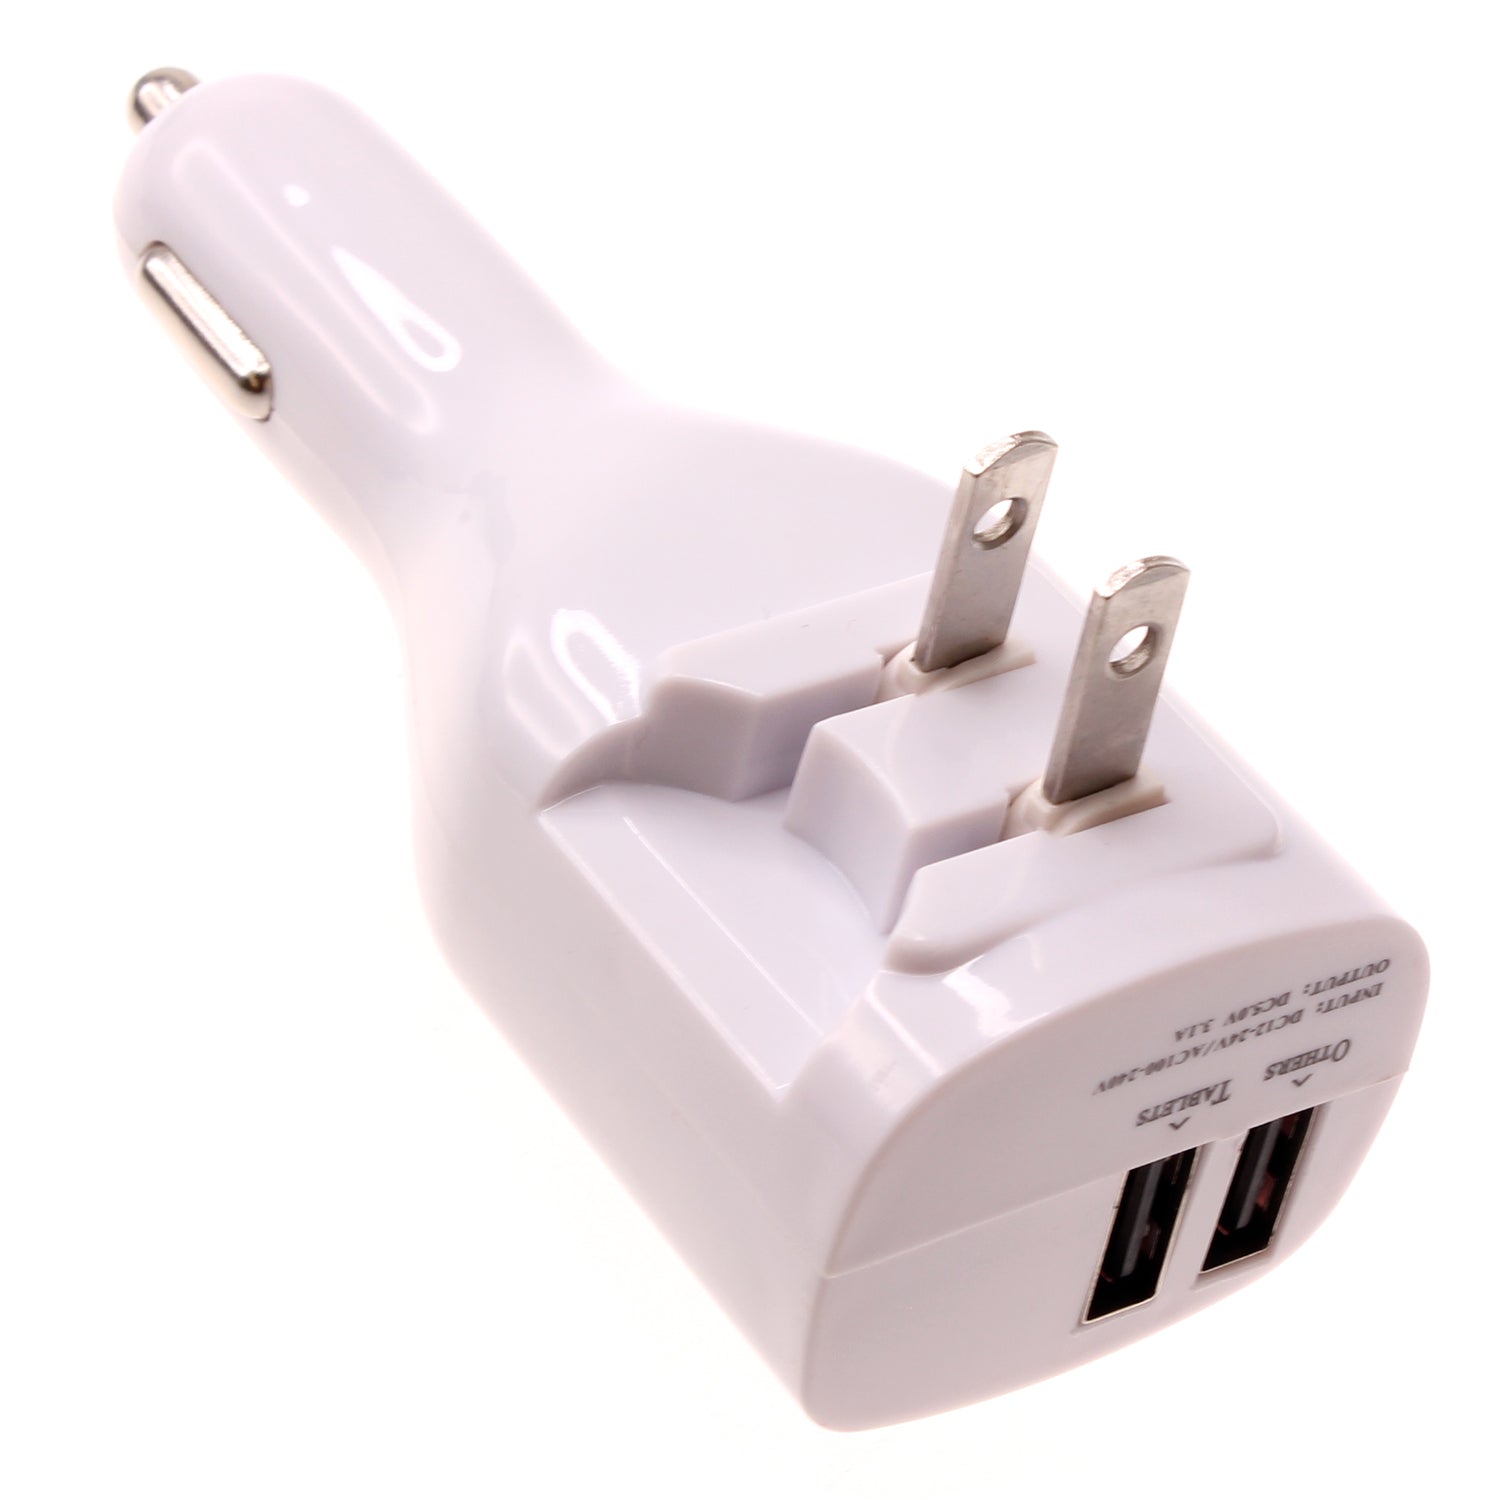 2-in-1 Car Home Charger, Folding Prongs Charging Wire Travel Adapter Power Cord 6ft Long USB Cable - NWY13